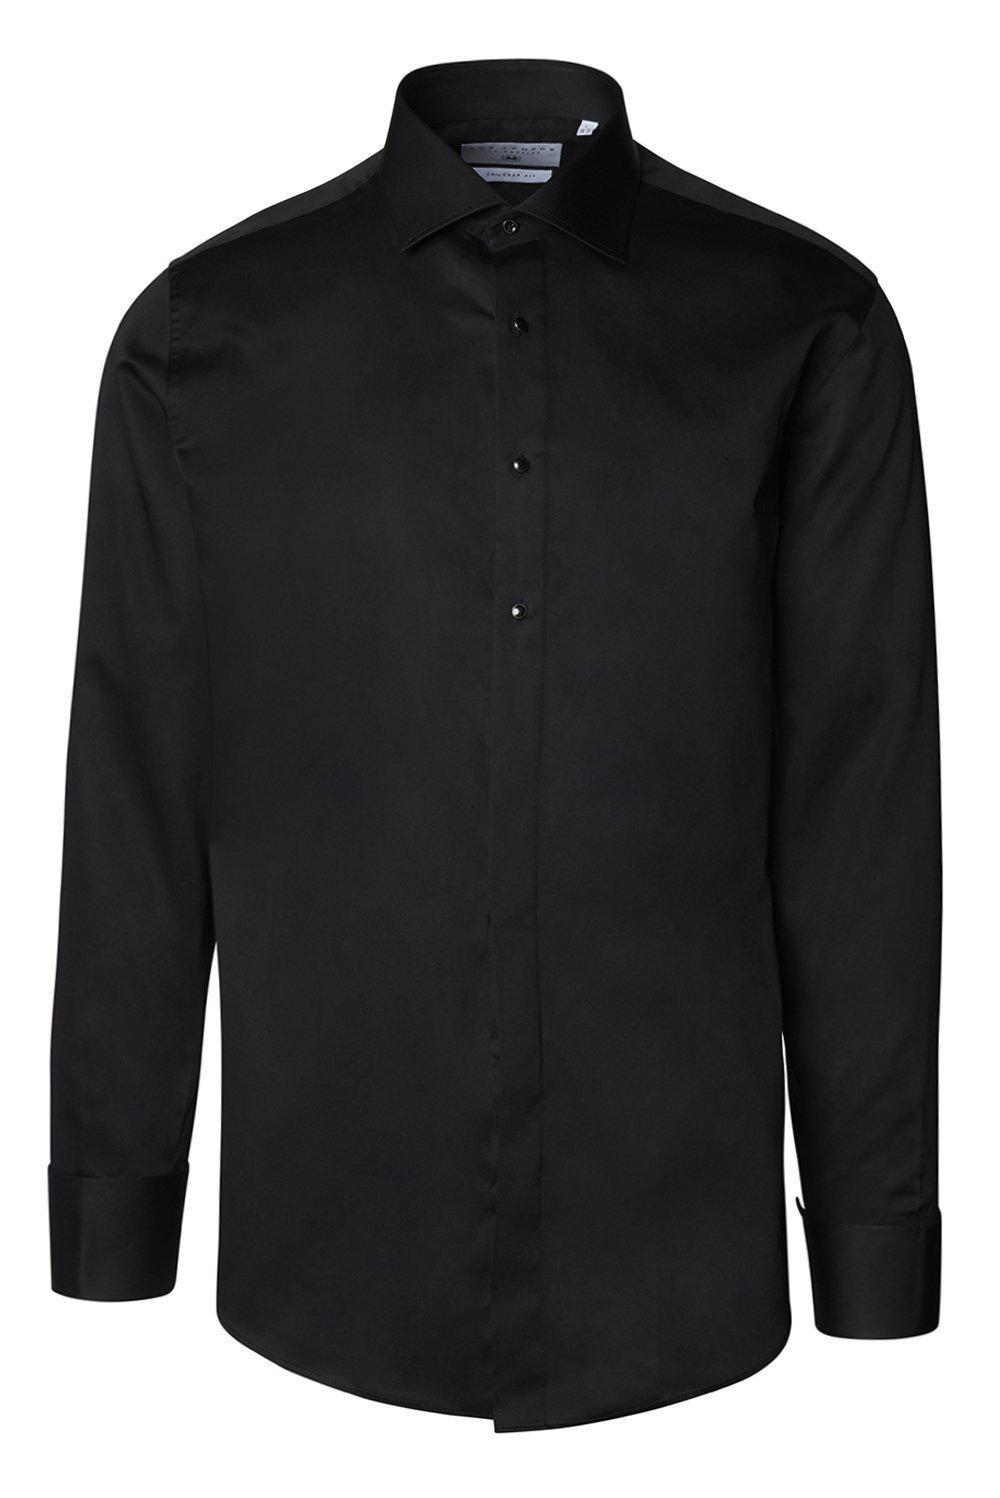 Classical Top 3 Removable Buttoned Tuxedo Shirt - Black - Ron Tomson